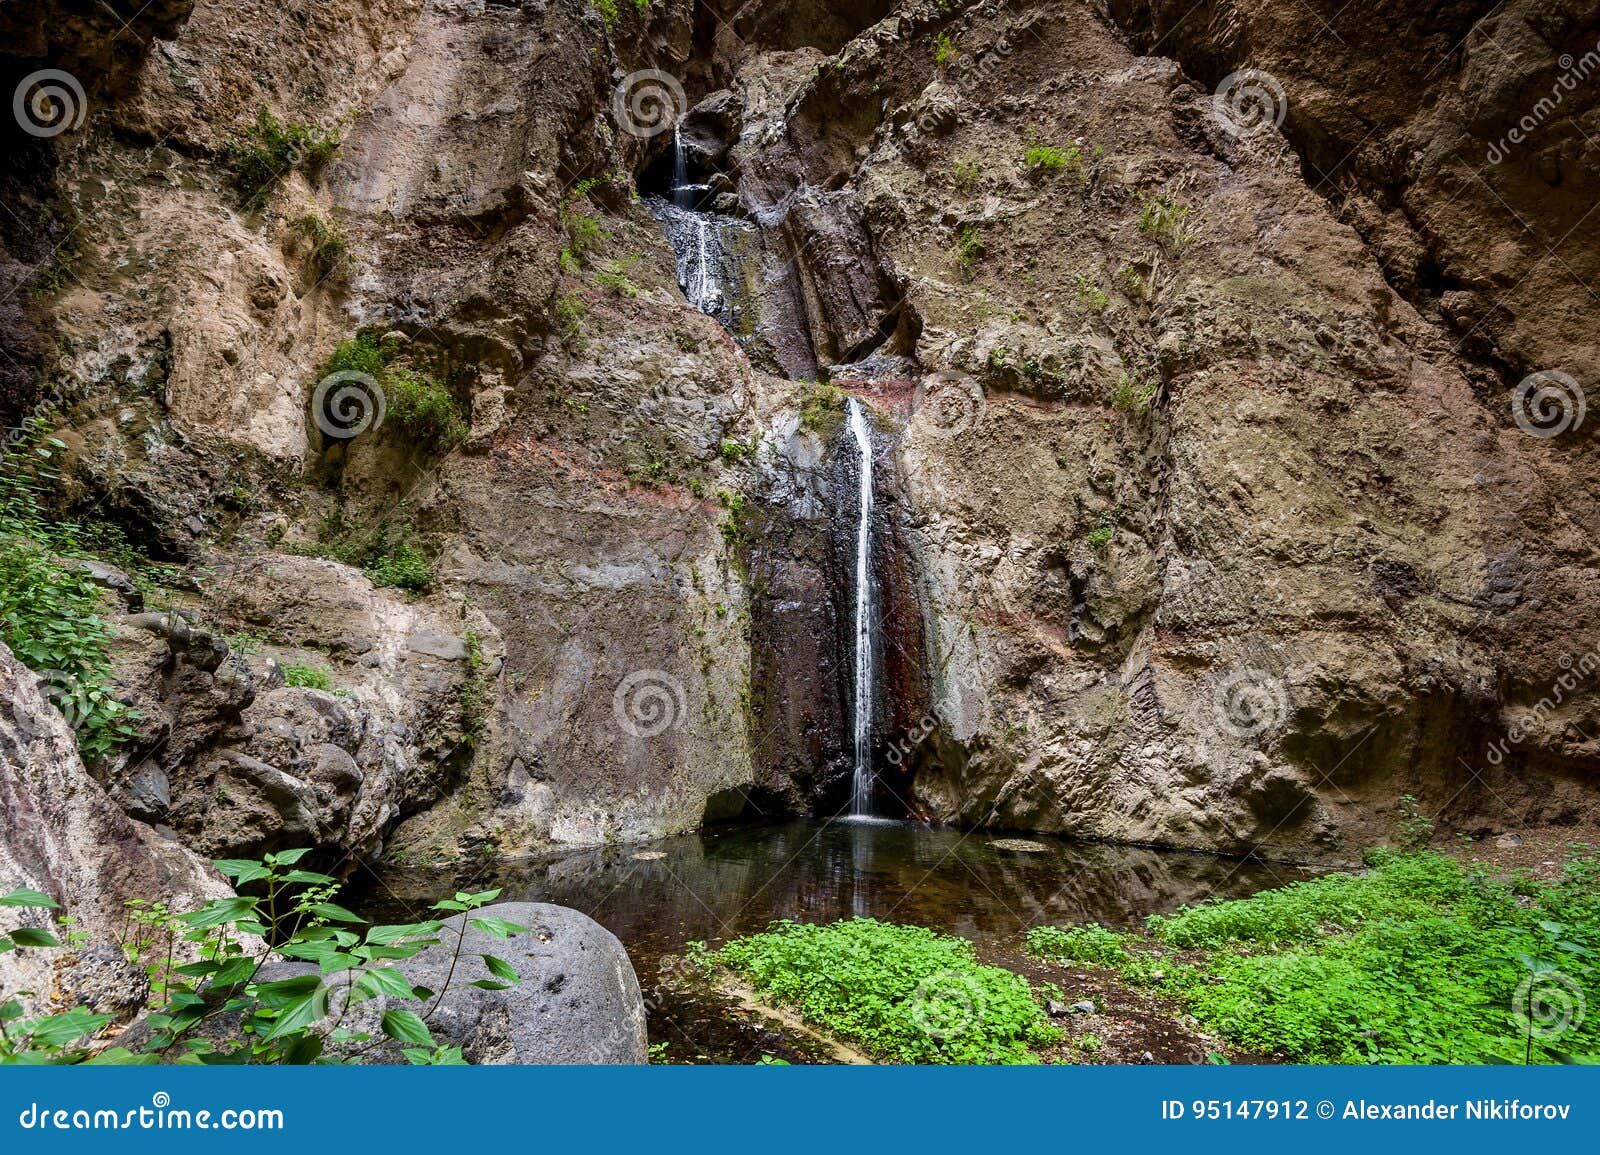 tourists at barranco del infierno waterfall